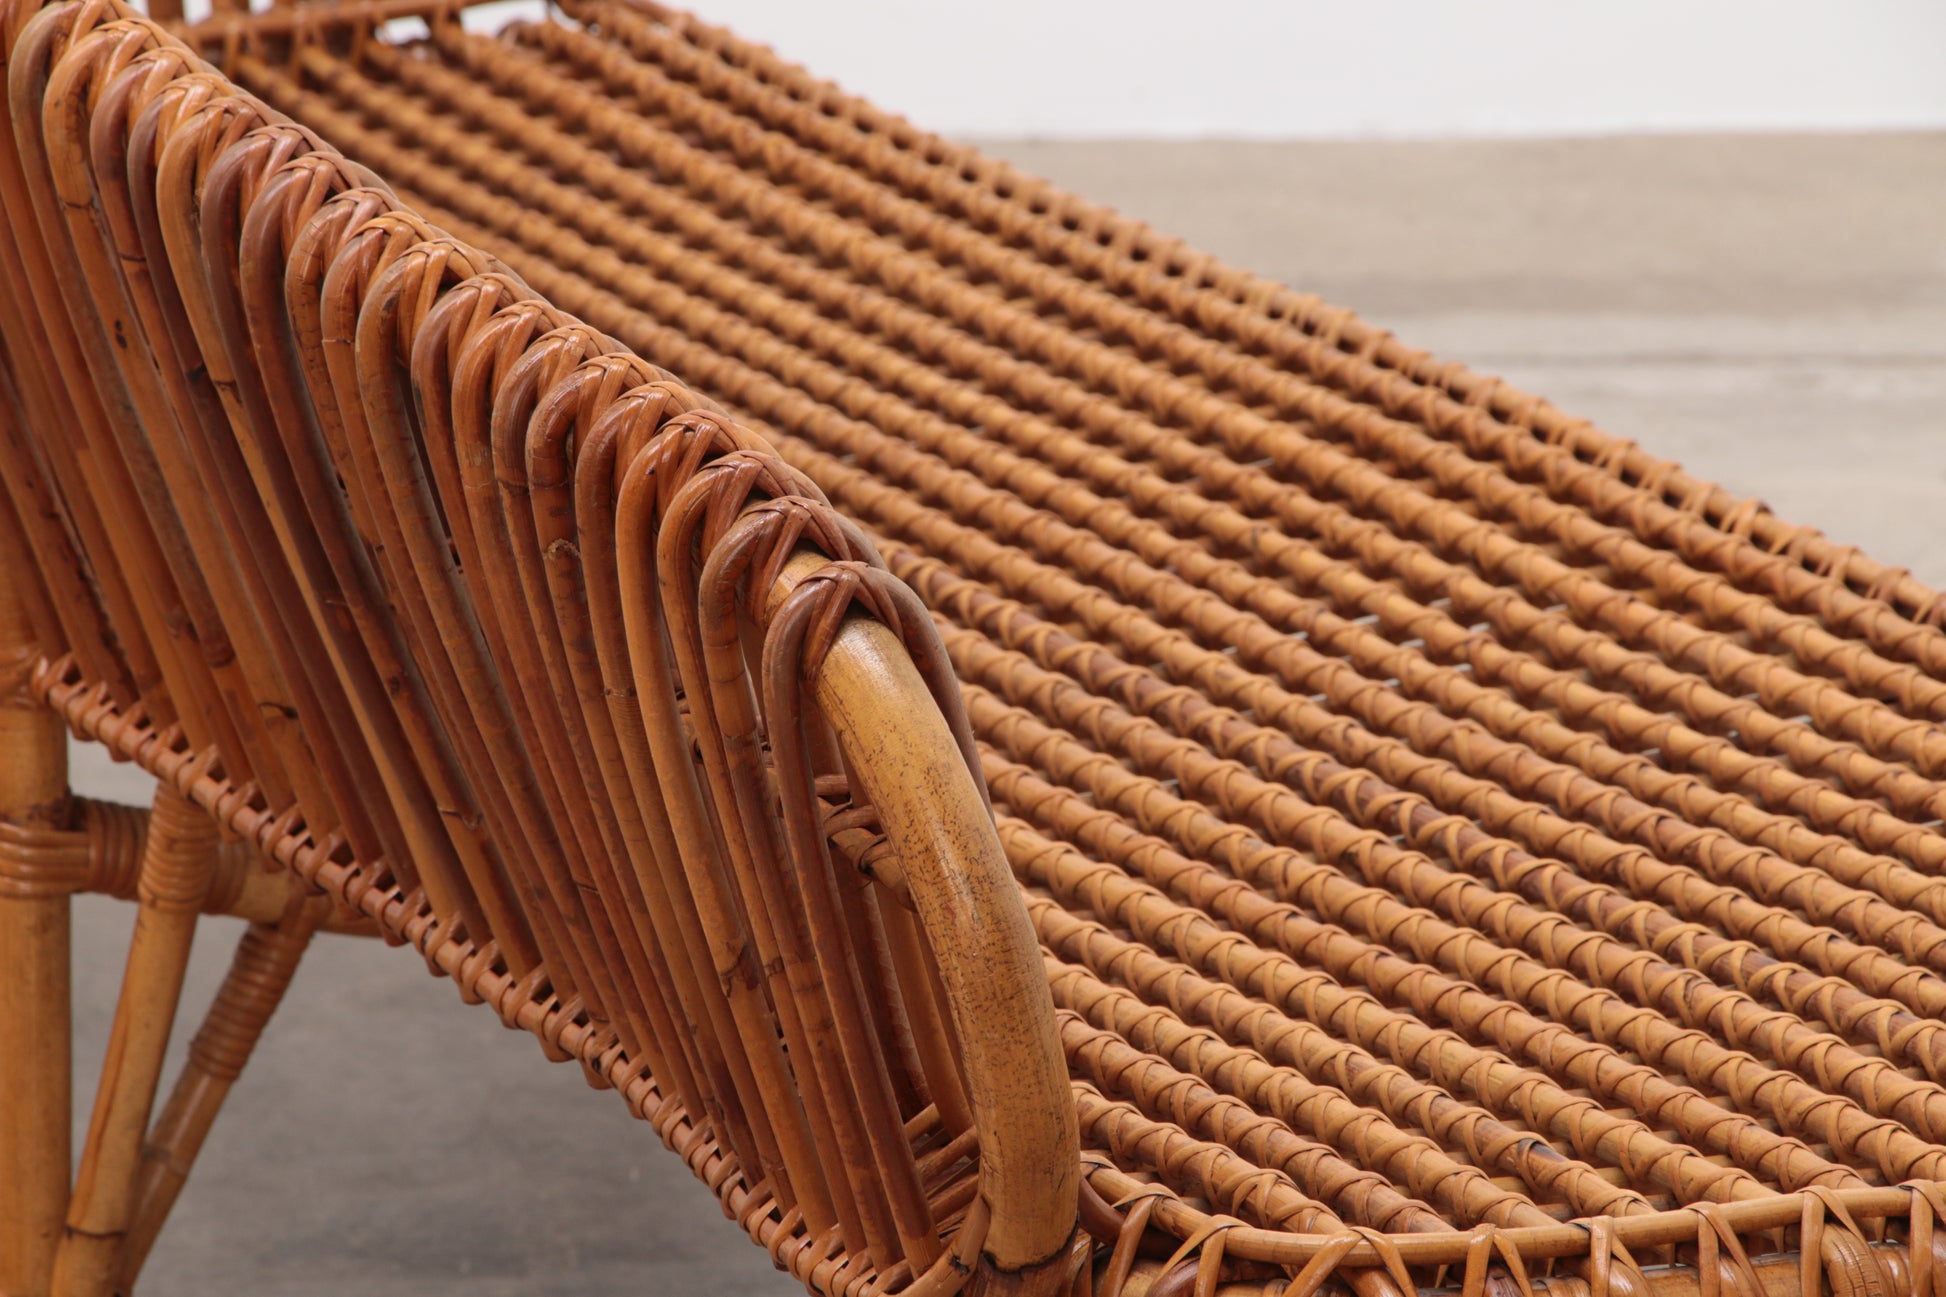 Exclusieve Bamboo and Rattan Chaise Lounge Attributed to Franco Albini